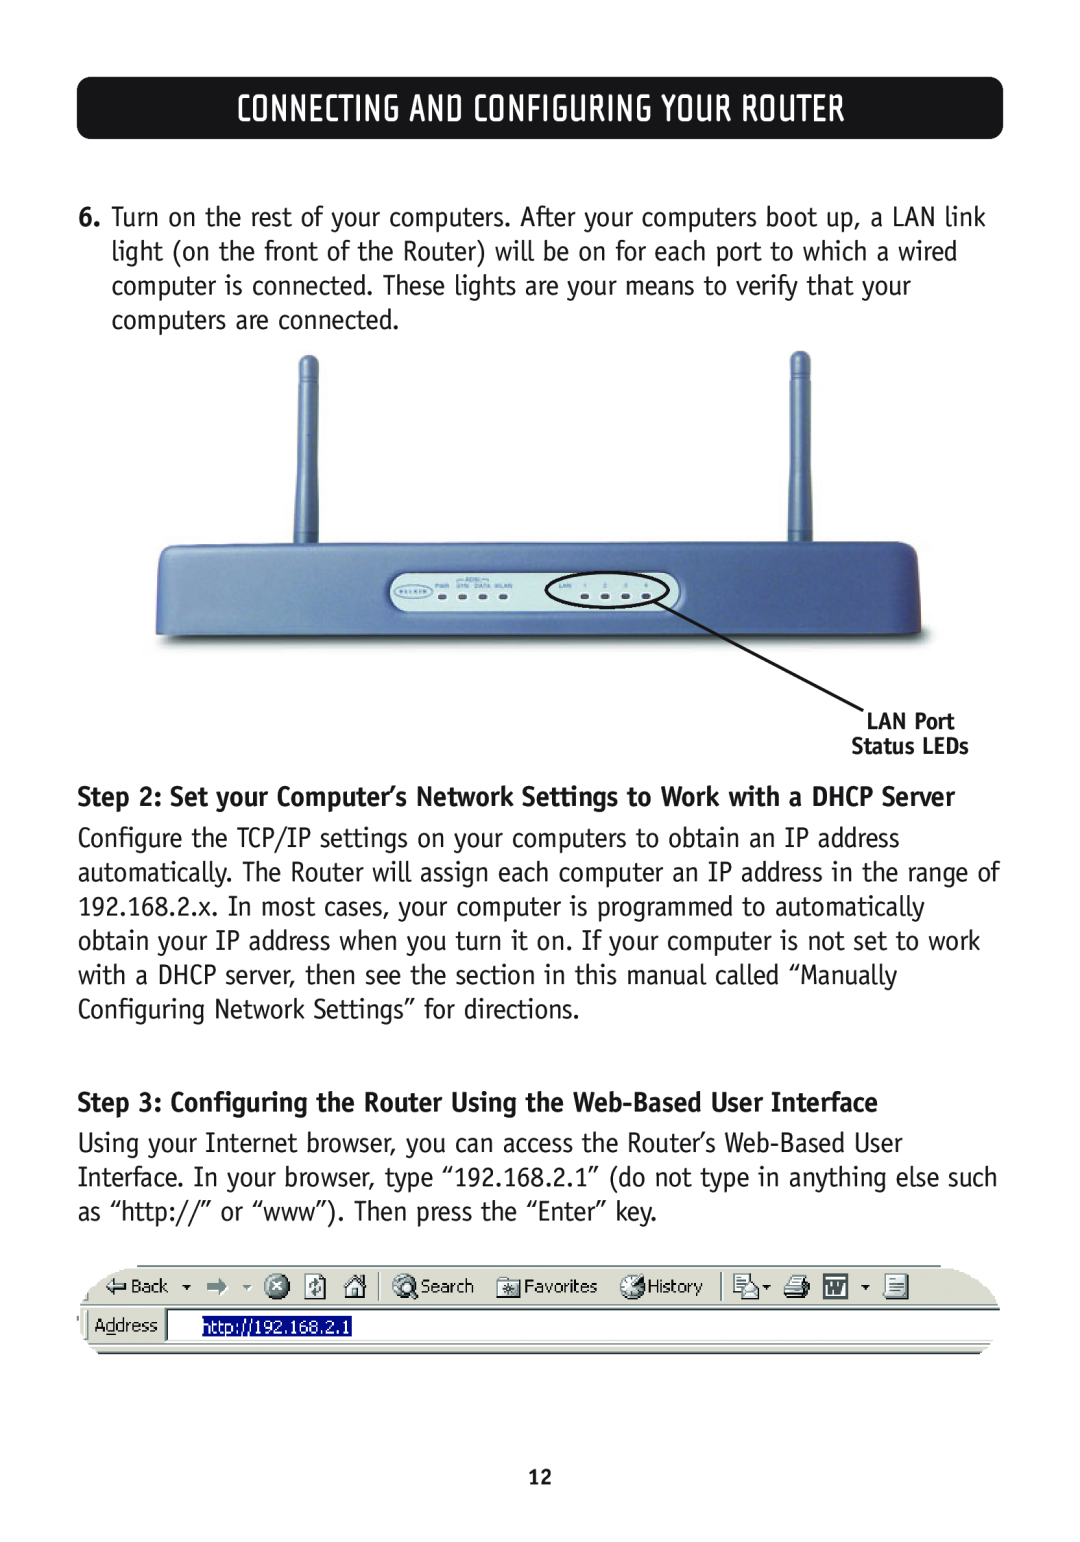 Belkin F5D7630-4A Configuring the Router Using the Web-Based User Interface, Connecting And Configuring Your Router 